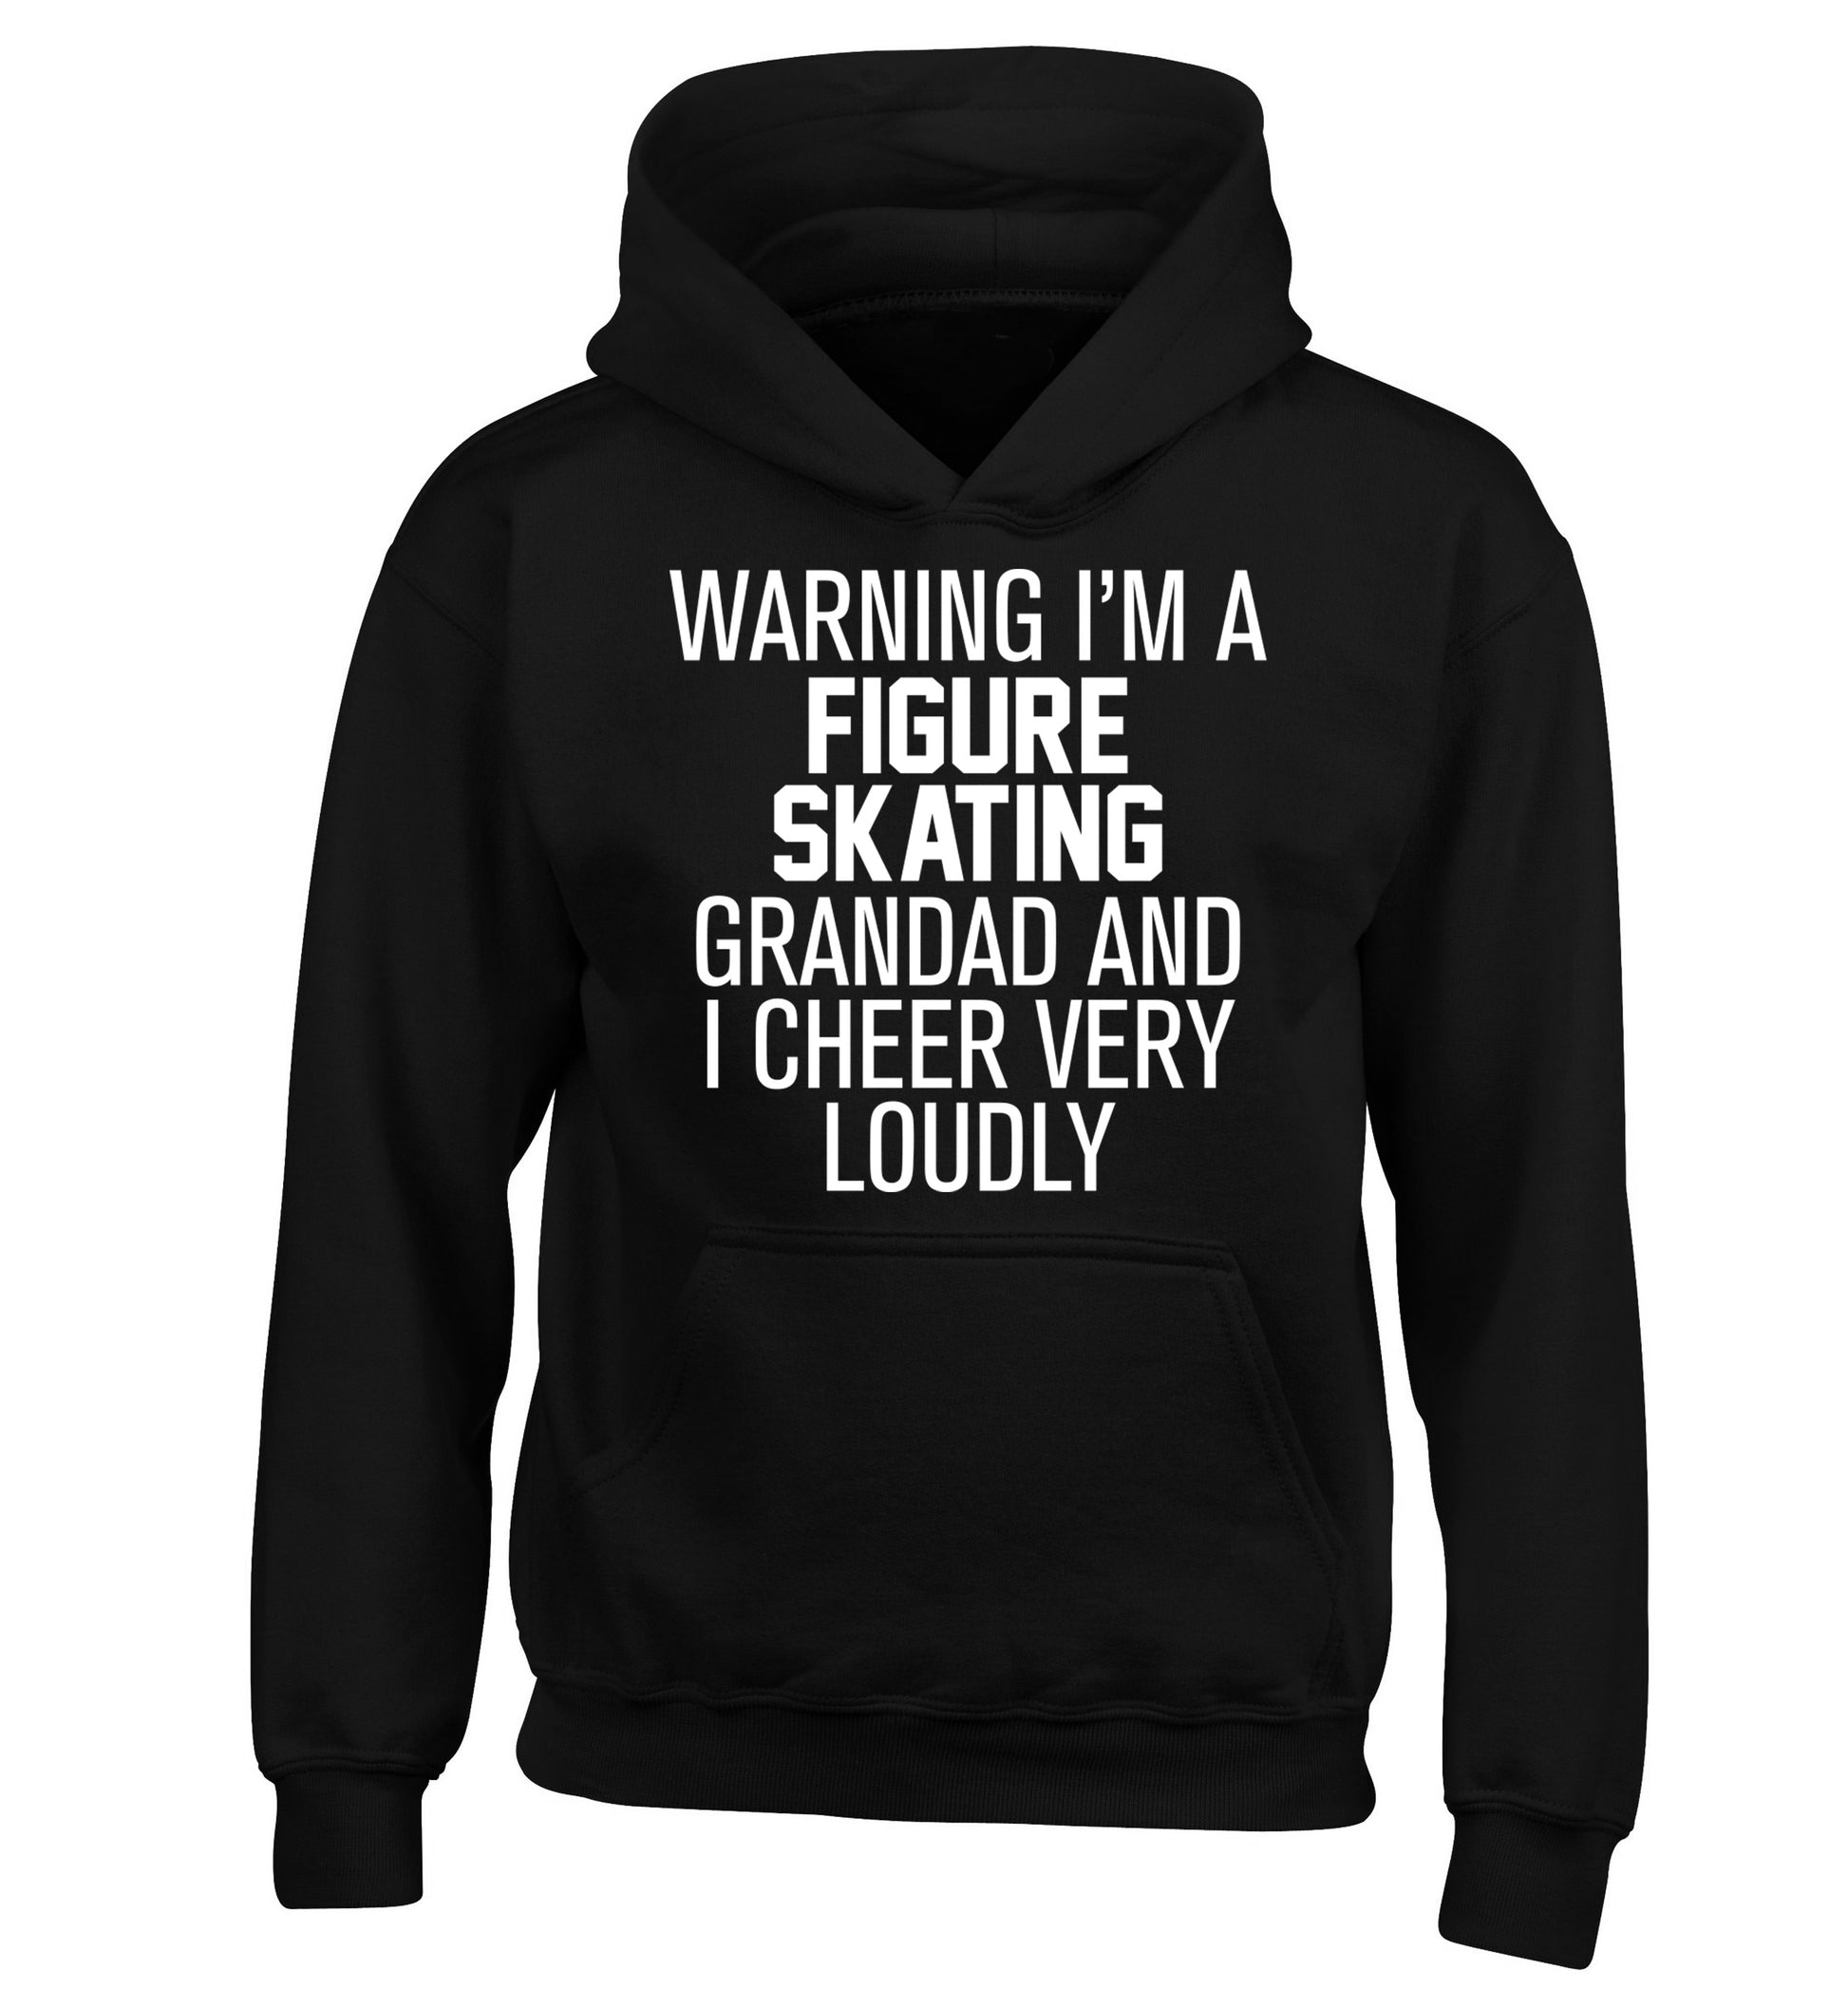 Warning I'm a figure skating grandad and I cheer very loudly children's black hoodie 12-14 Years